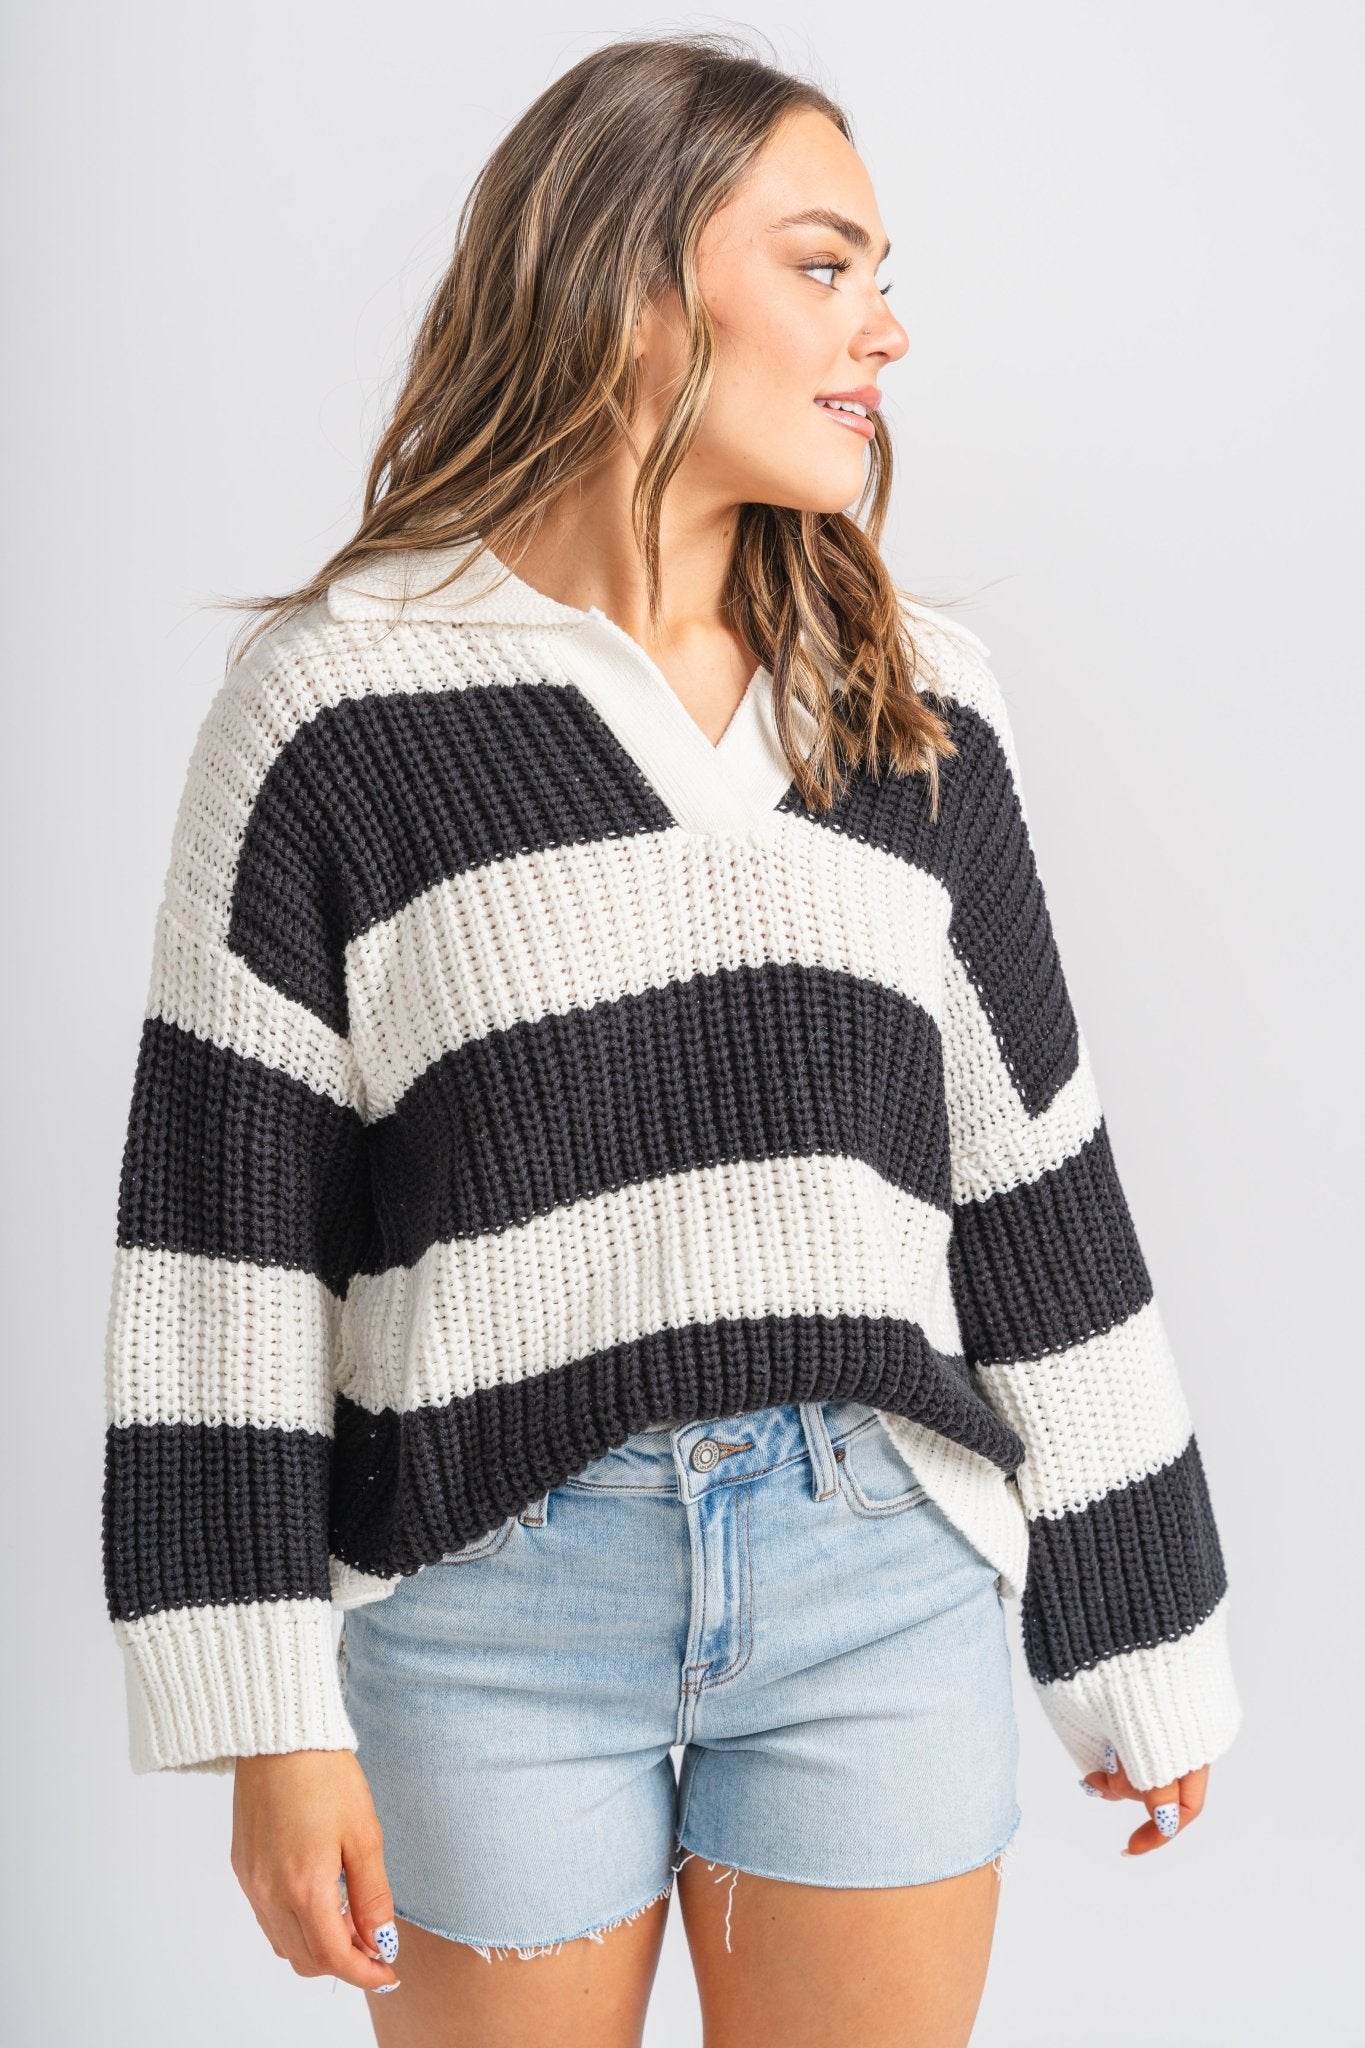 Boxy striped sweater cream/black - Trendy Sweaters | Cute Pullover Sweaters at Lush Fashion Lounge Boutique in Oklahoma City